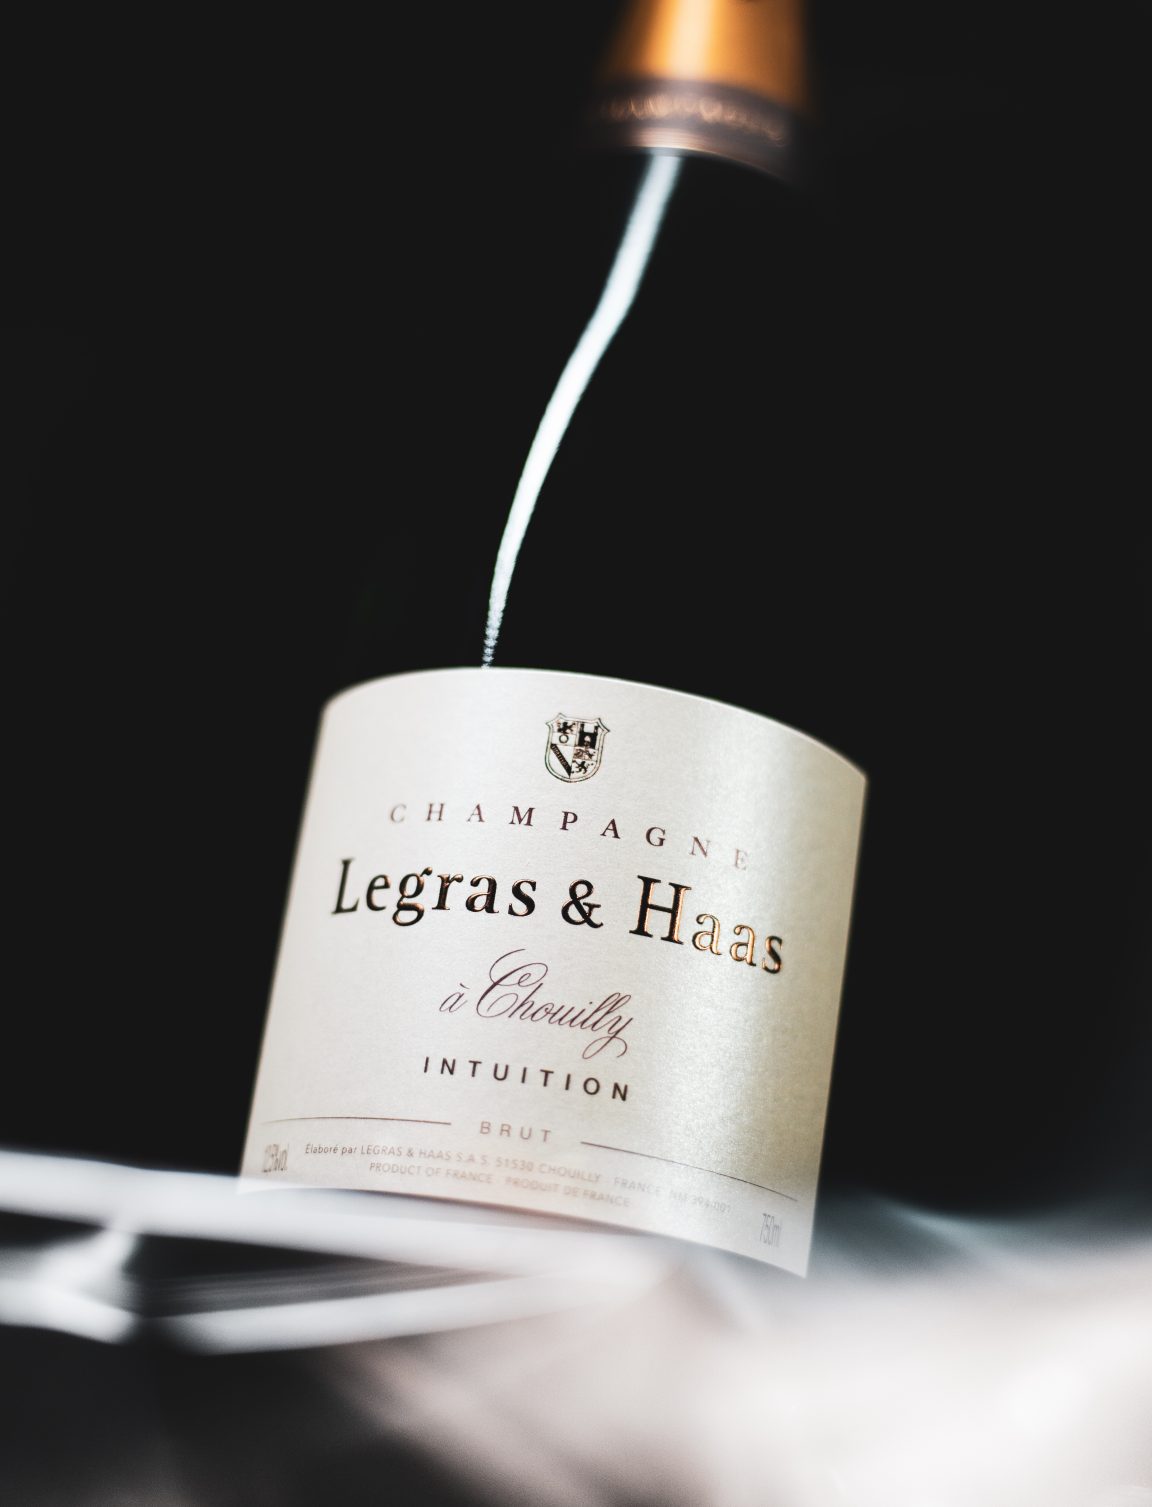 Brut Intuition - Champagne Legras & Haas